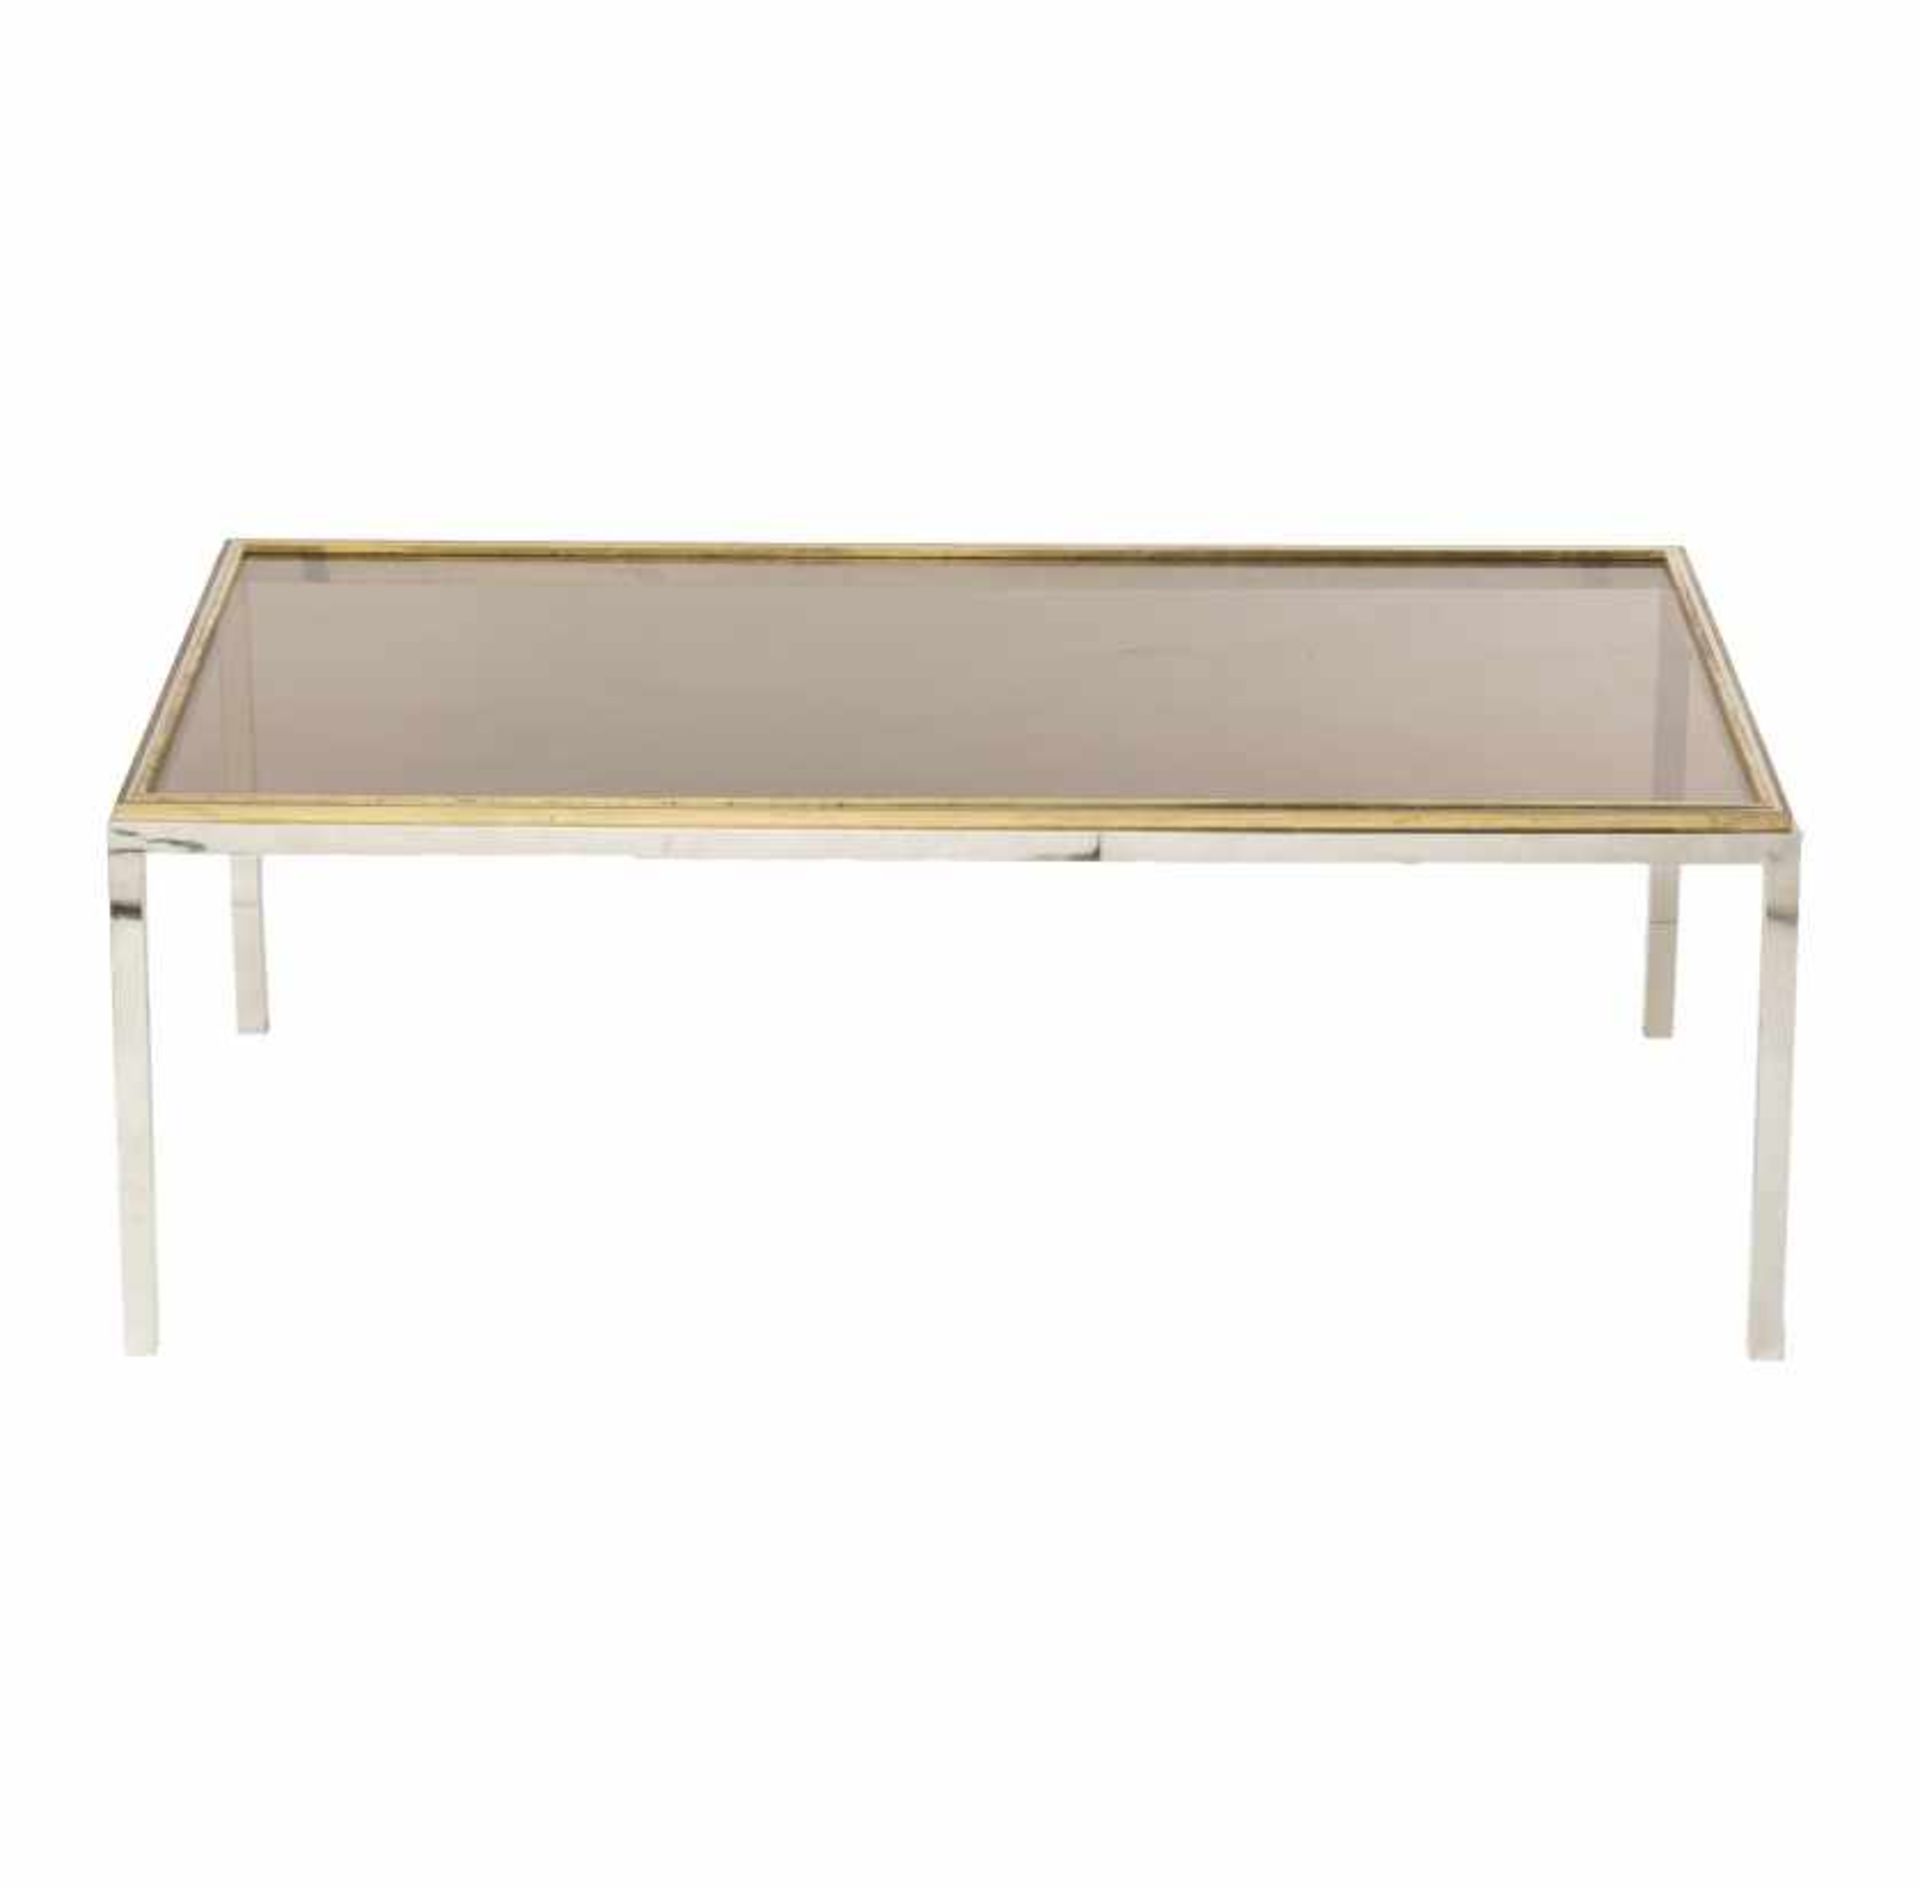 Dining table in the style of the "Flaminia" table by WillyDining table in the style of the "